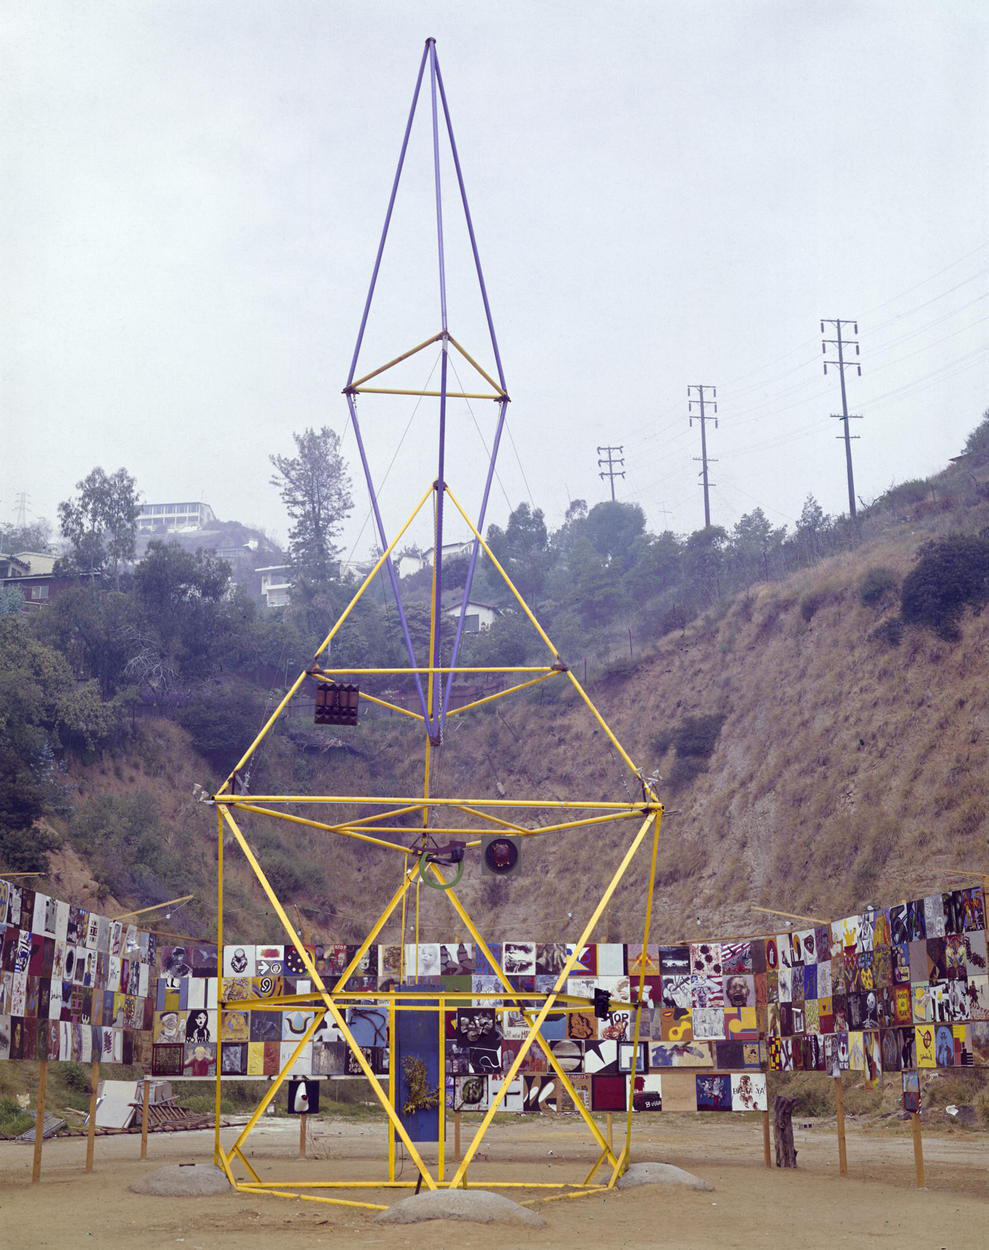 Mark di Suvero, <em>Artists' Tower of Protest</em> (Peace Tower), 1966. Steel and mixed media, 55 ft. Installed Los Angeles. Charles Brittin Archive, The Getty Research Institute, Los Angeles, (2005.M.11). Photo: Charles Brittin. © J. Paul Getty Trust.